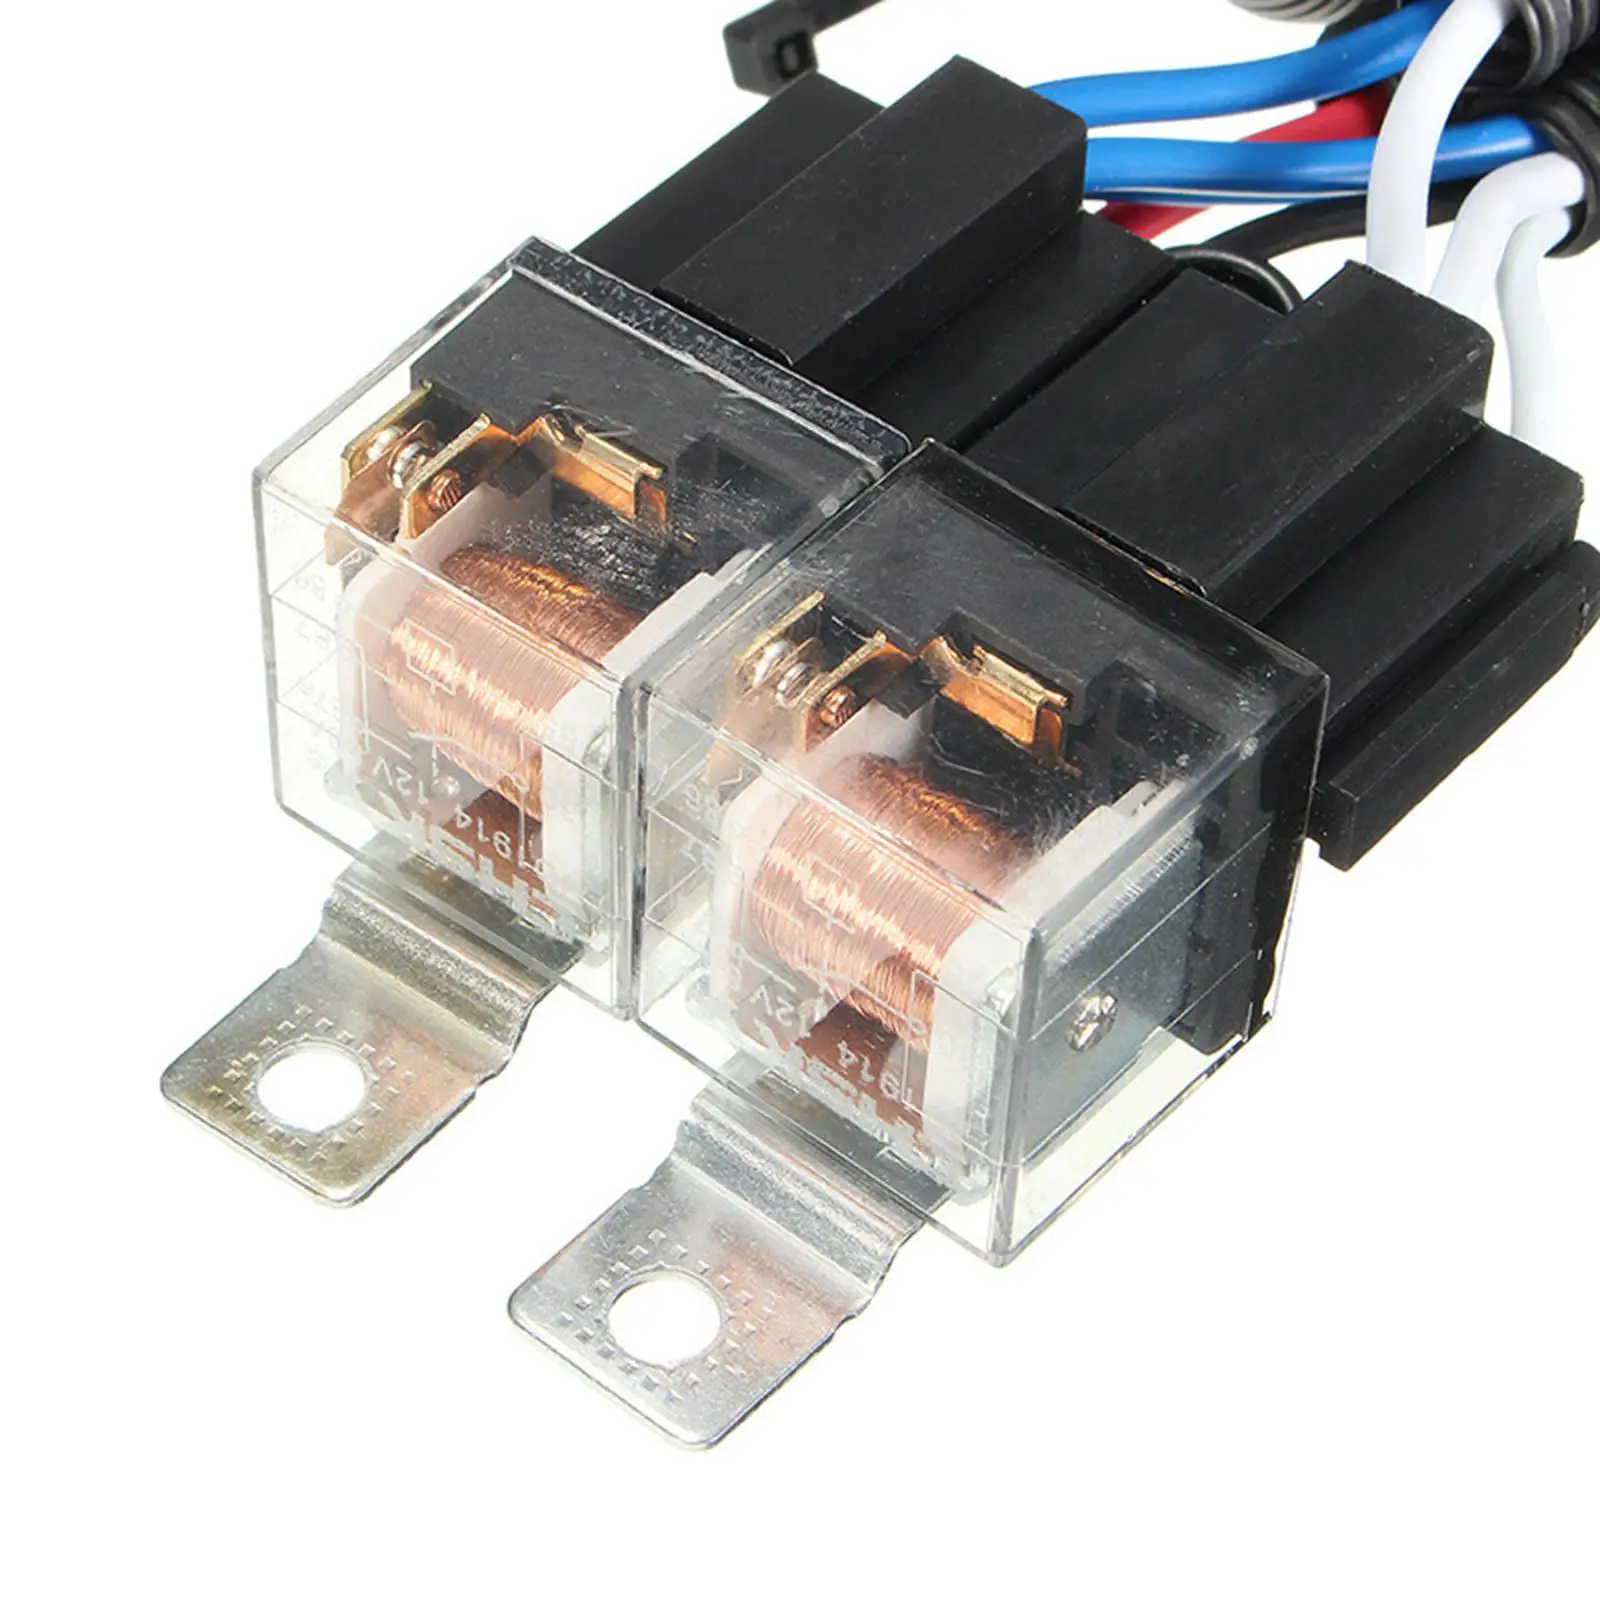 Auto H4 Headlight Relay Harness Durable Replacement 12V Professional Halogen